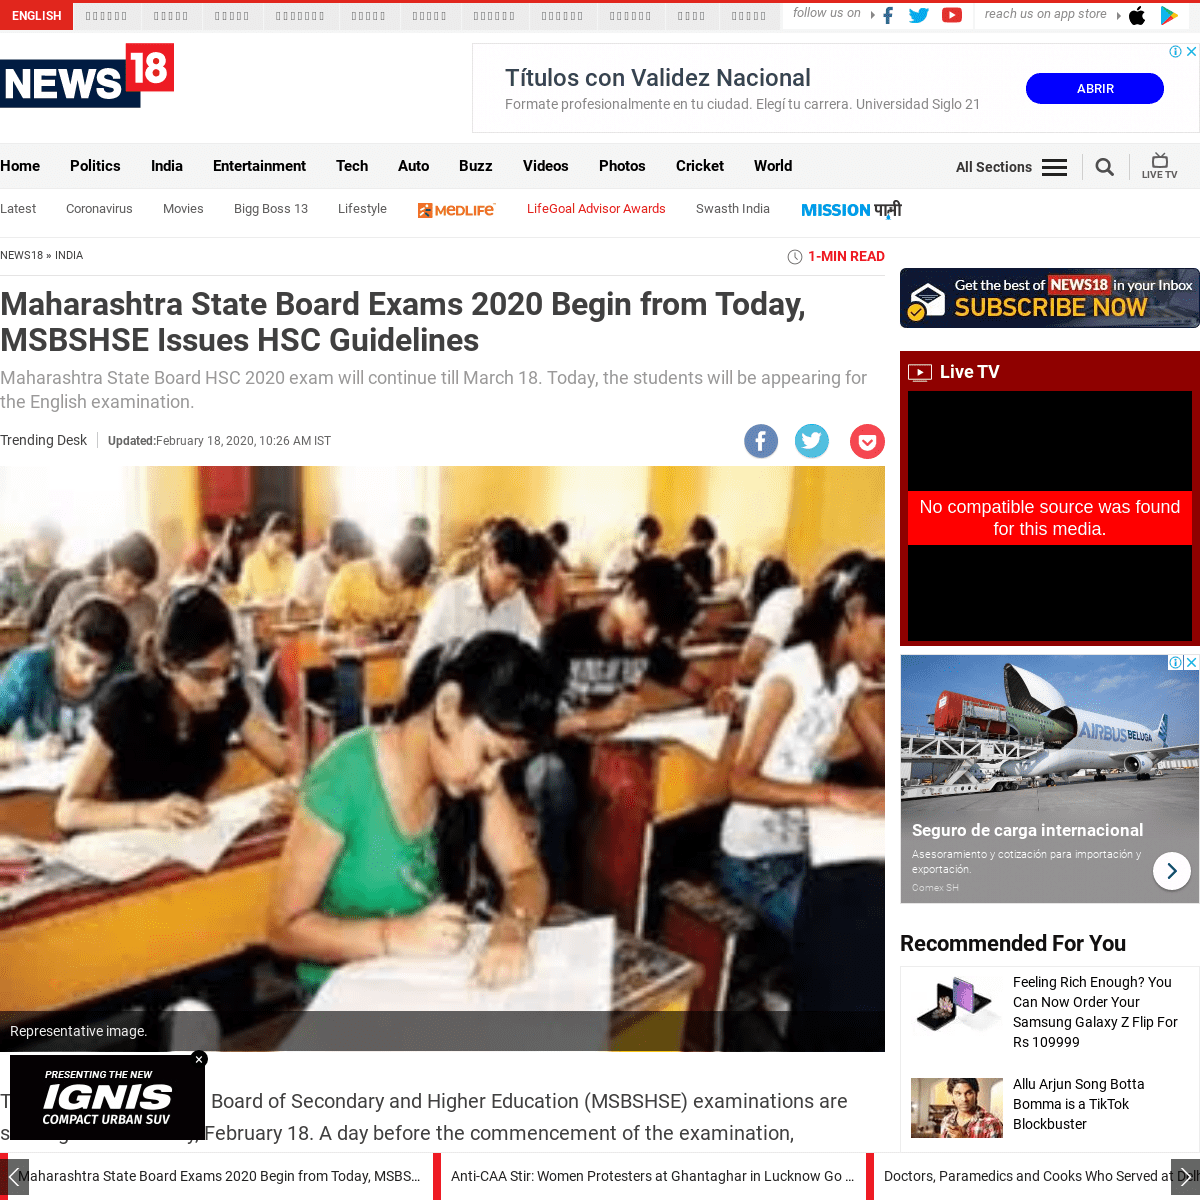 A complete backup of www.news18.com/news/india/maharashtra-state-board-exams-2020-begins-from-today-msbshse-issues-hsc-guideline